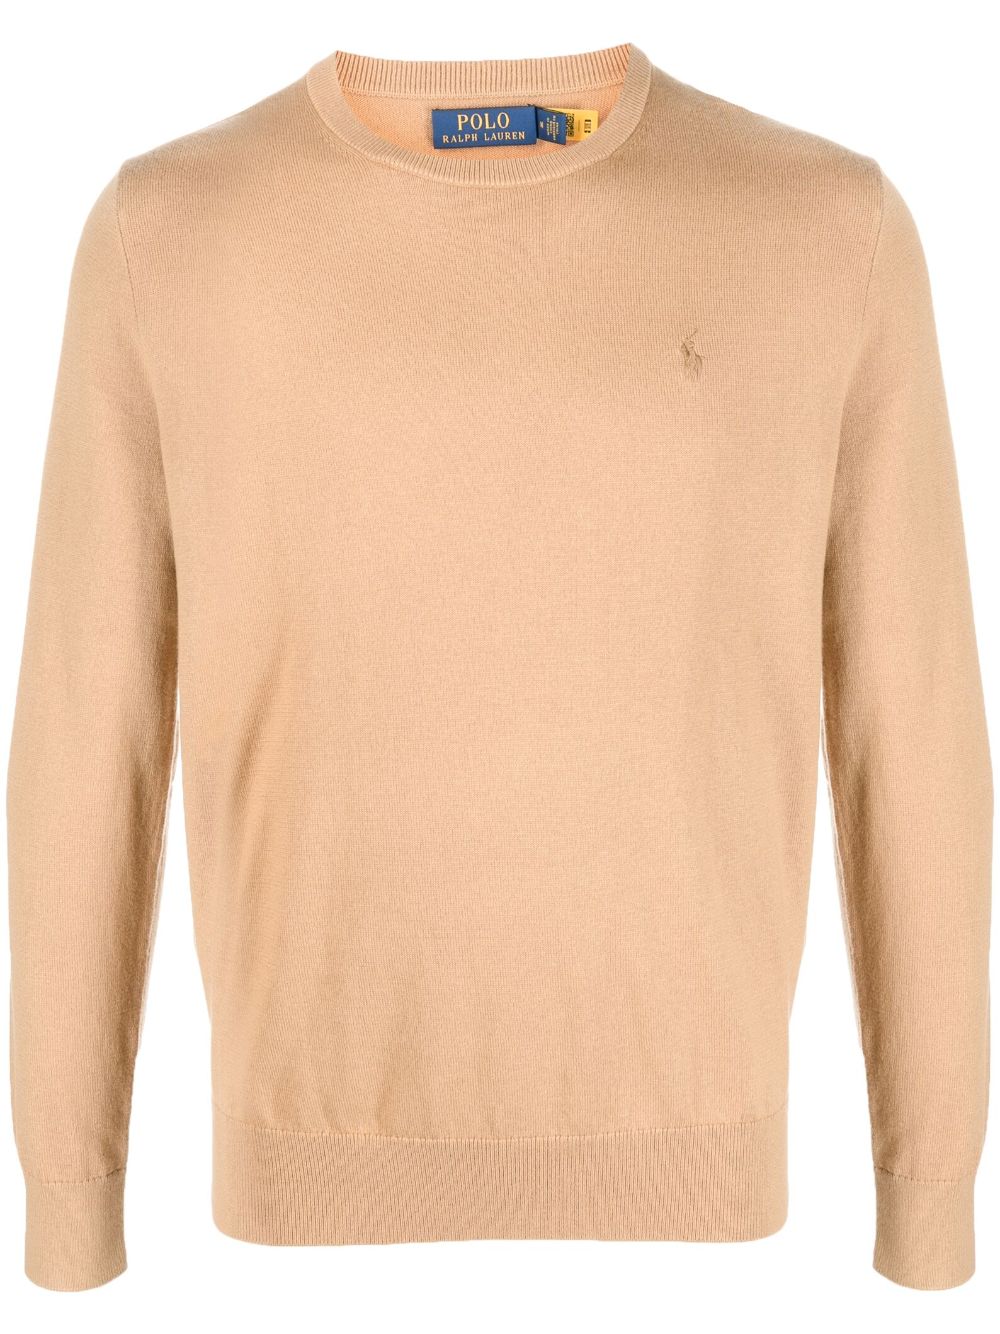 Image 1 of Polo Ralph Lauren embroidered-logo cotton-cashmere blend jumper